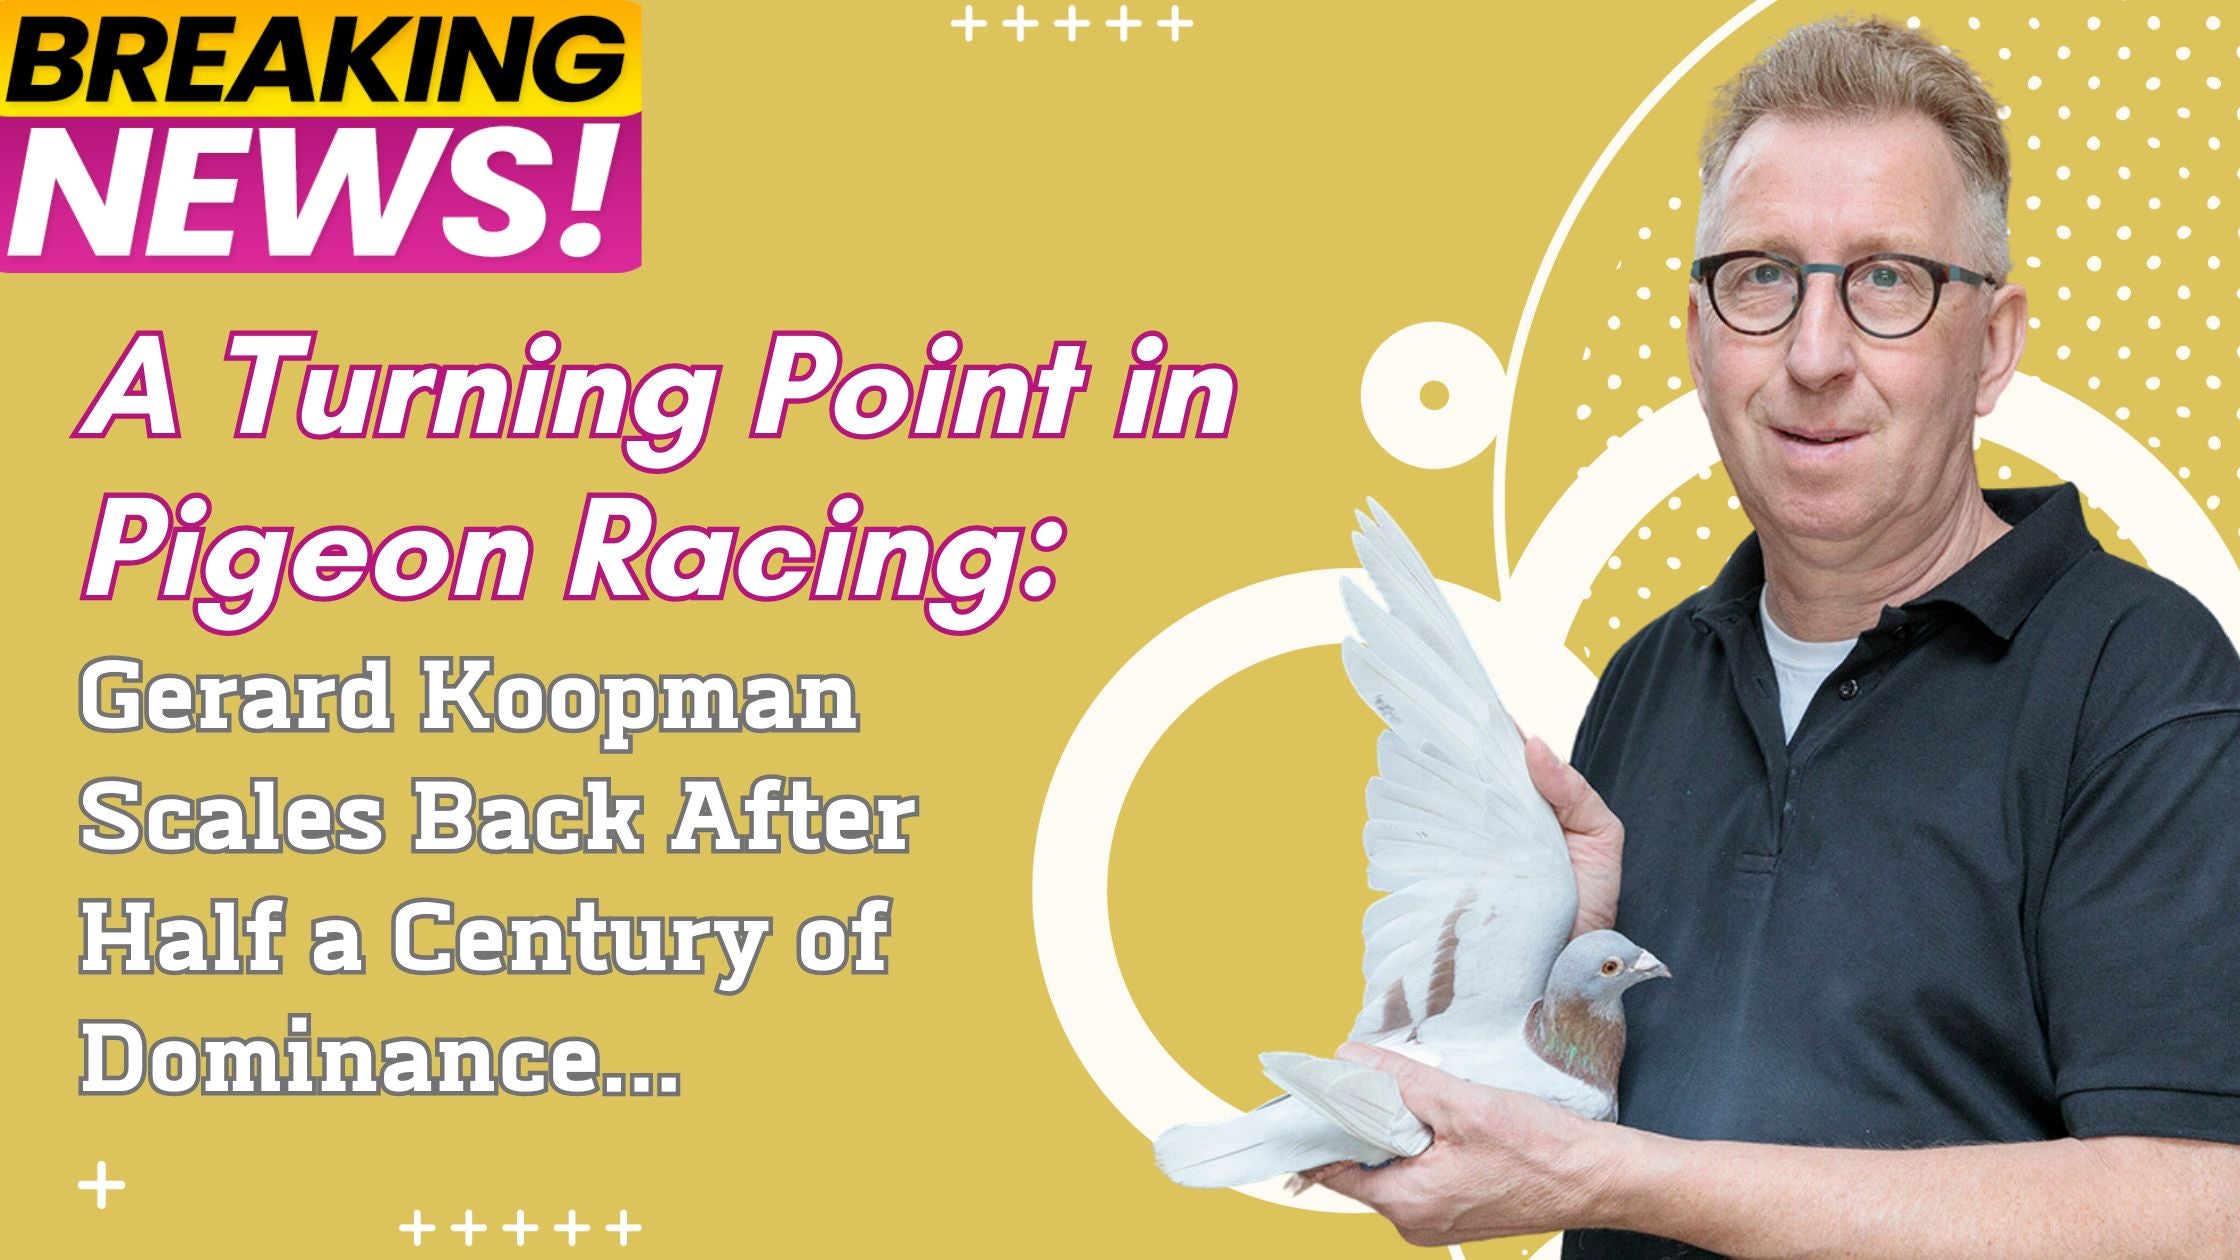 A Turning Point in Pigeon Racing: Gerard Koopman Scales Back After Half a Century of Dominance